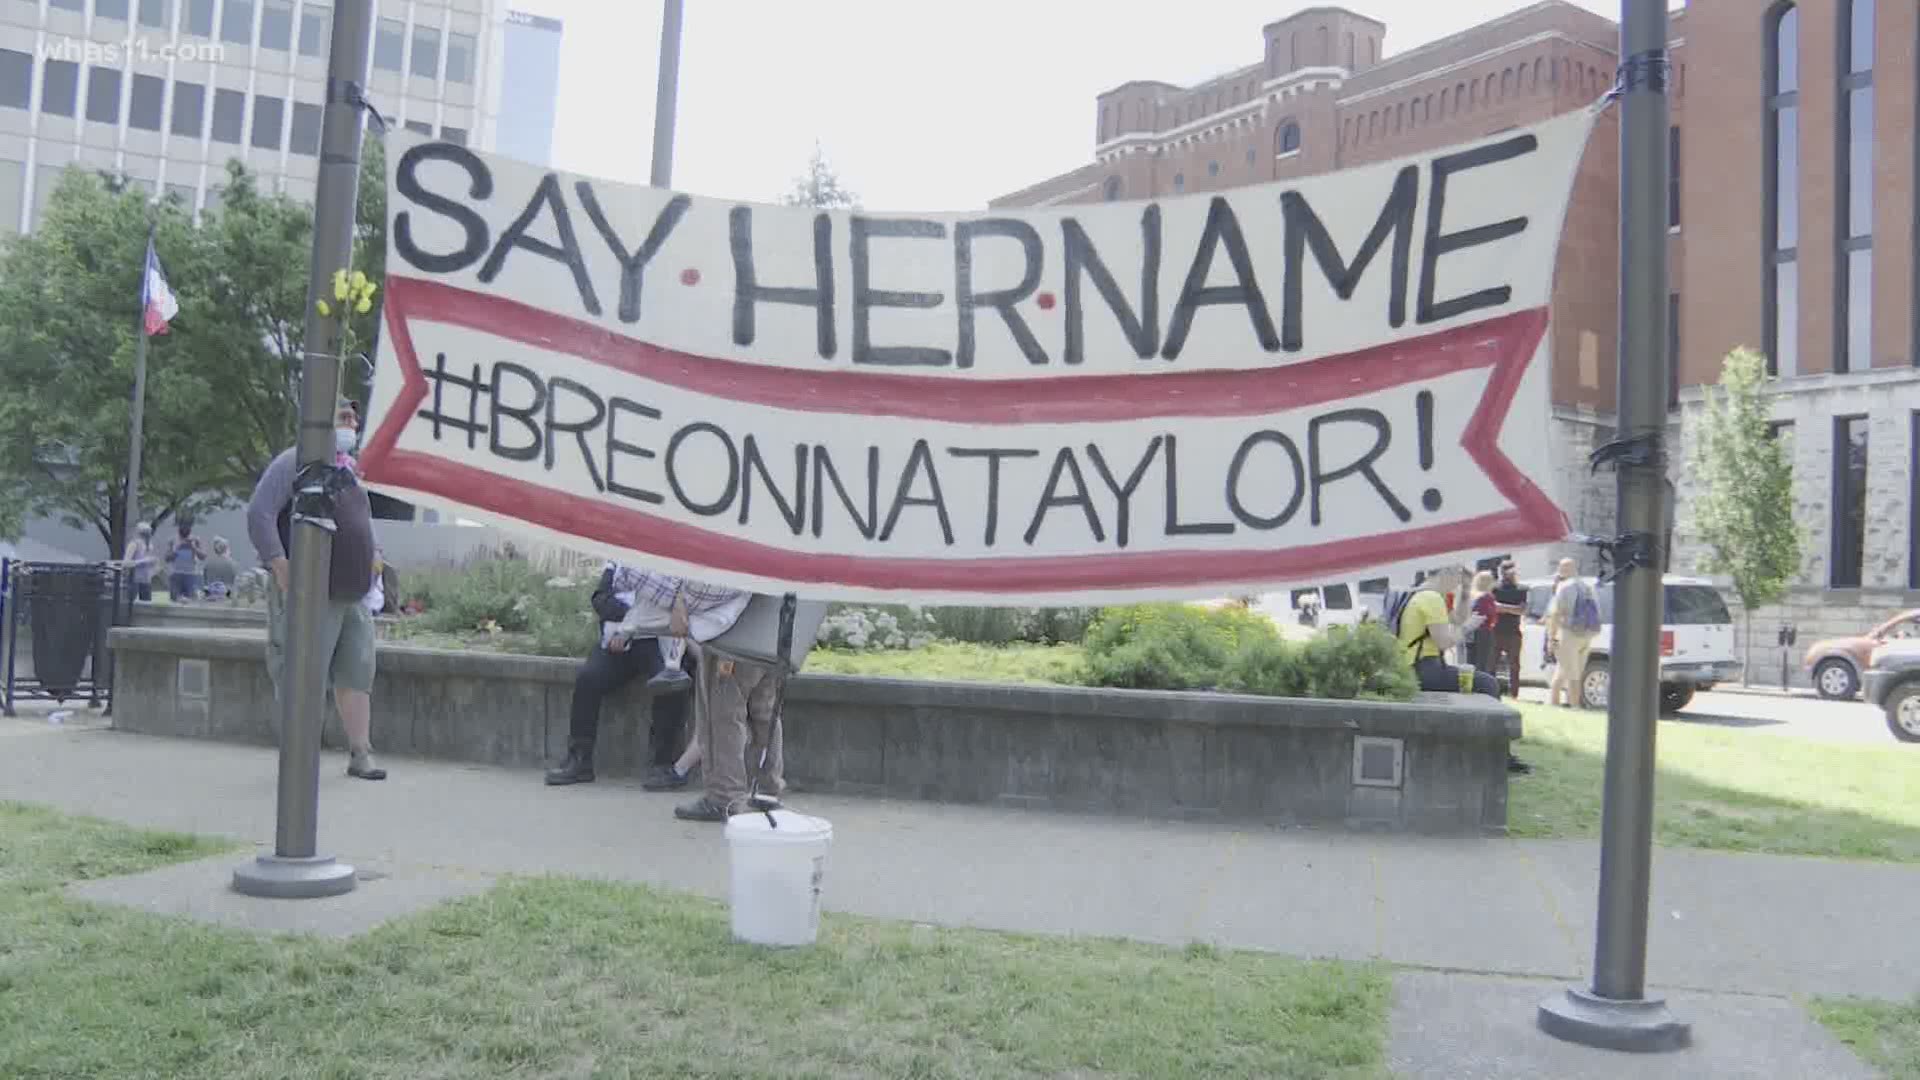 They're tired of waiting for justice for Breonna Taylor